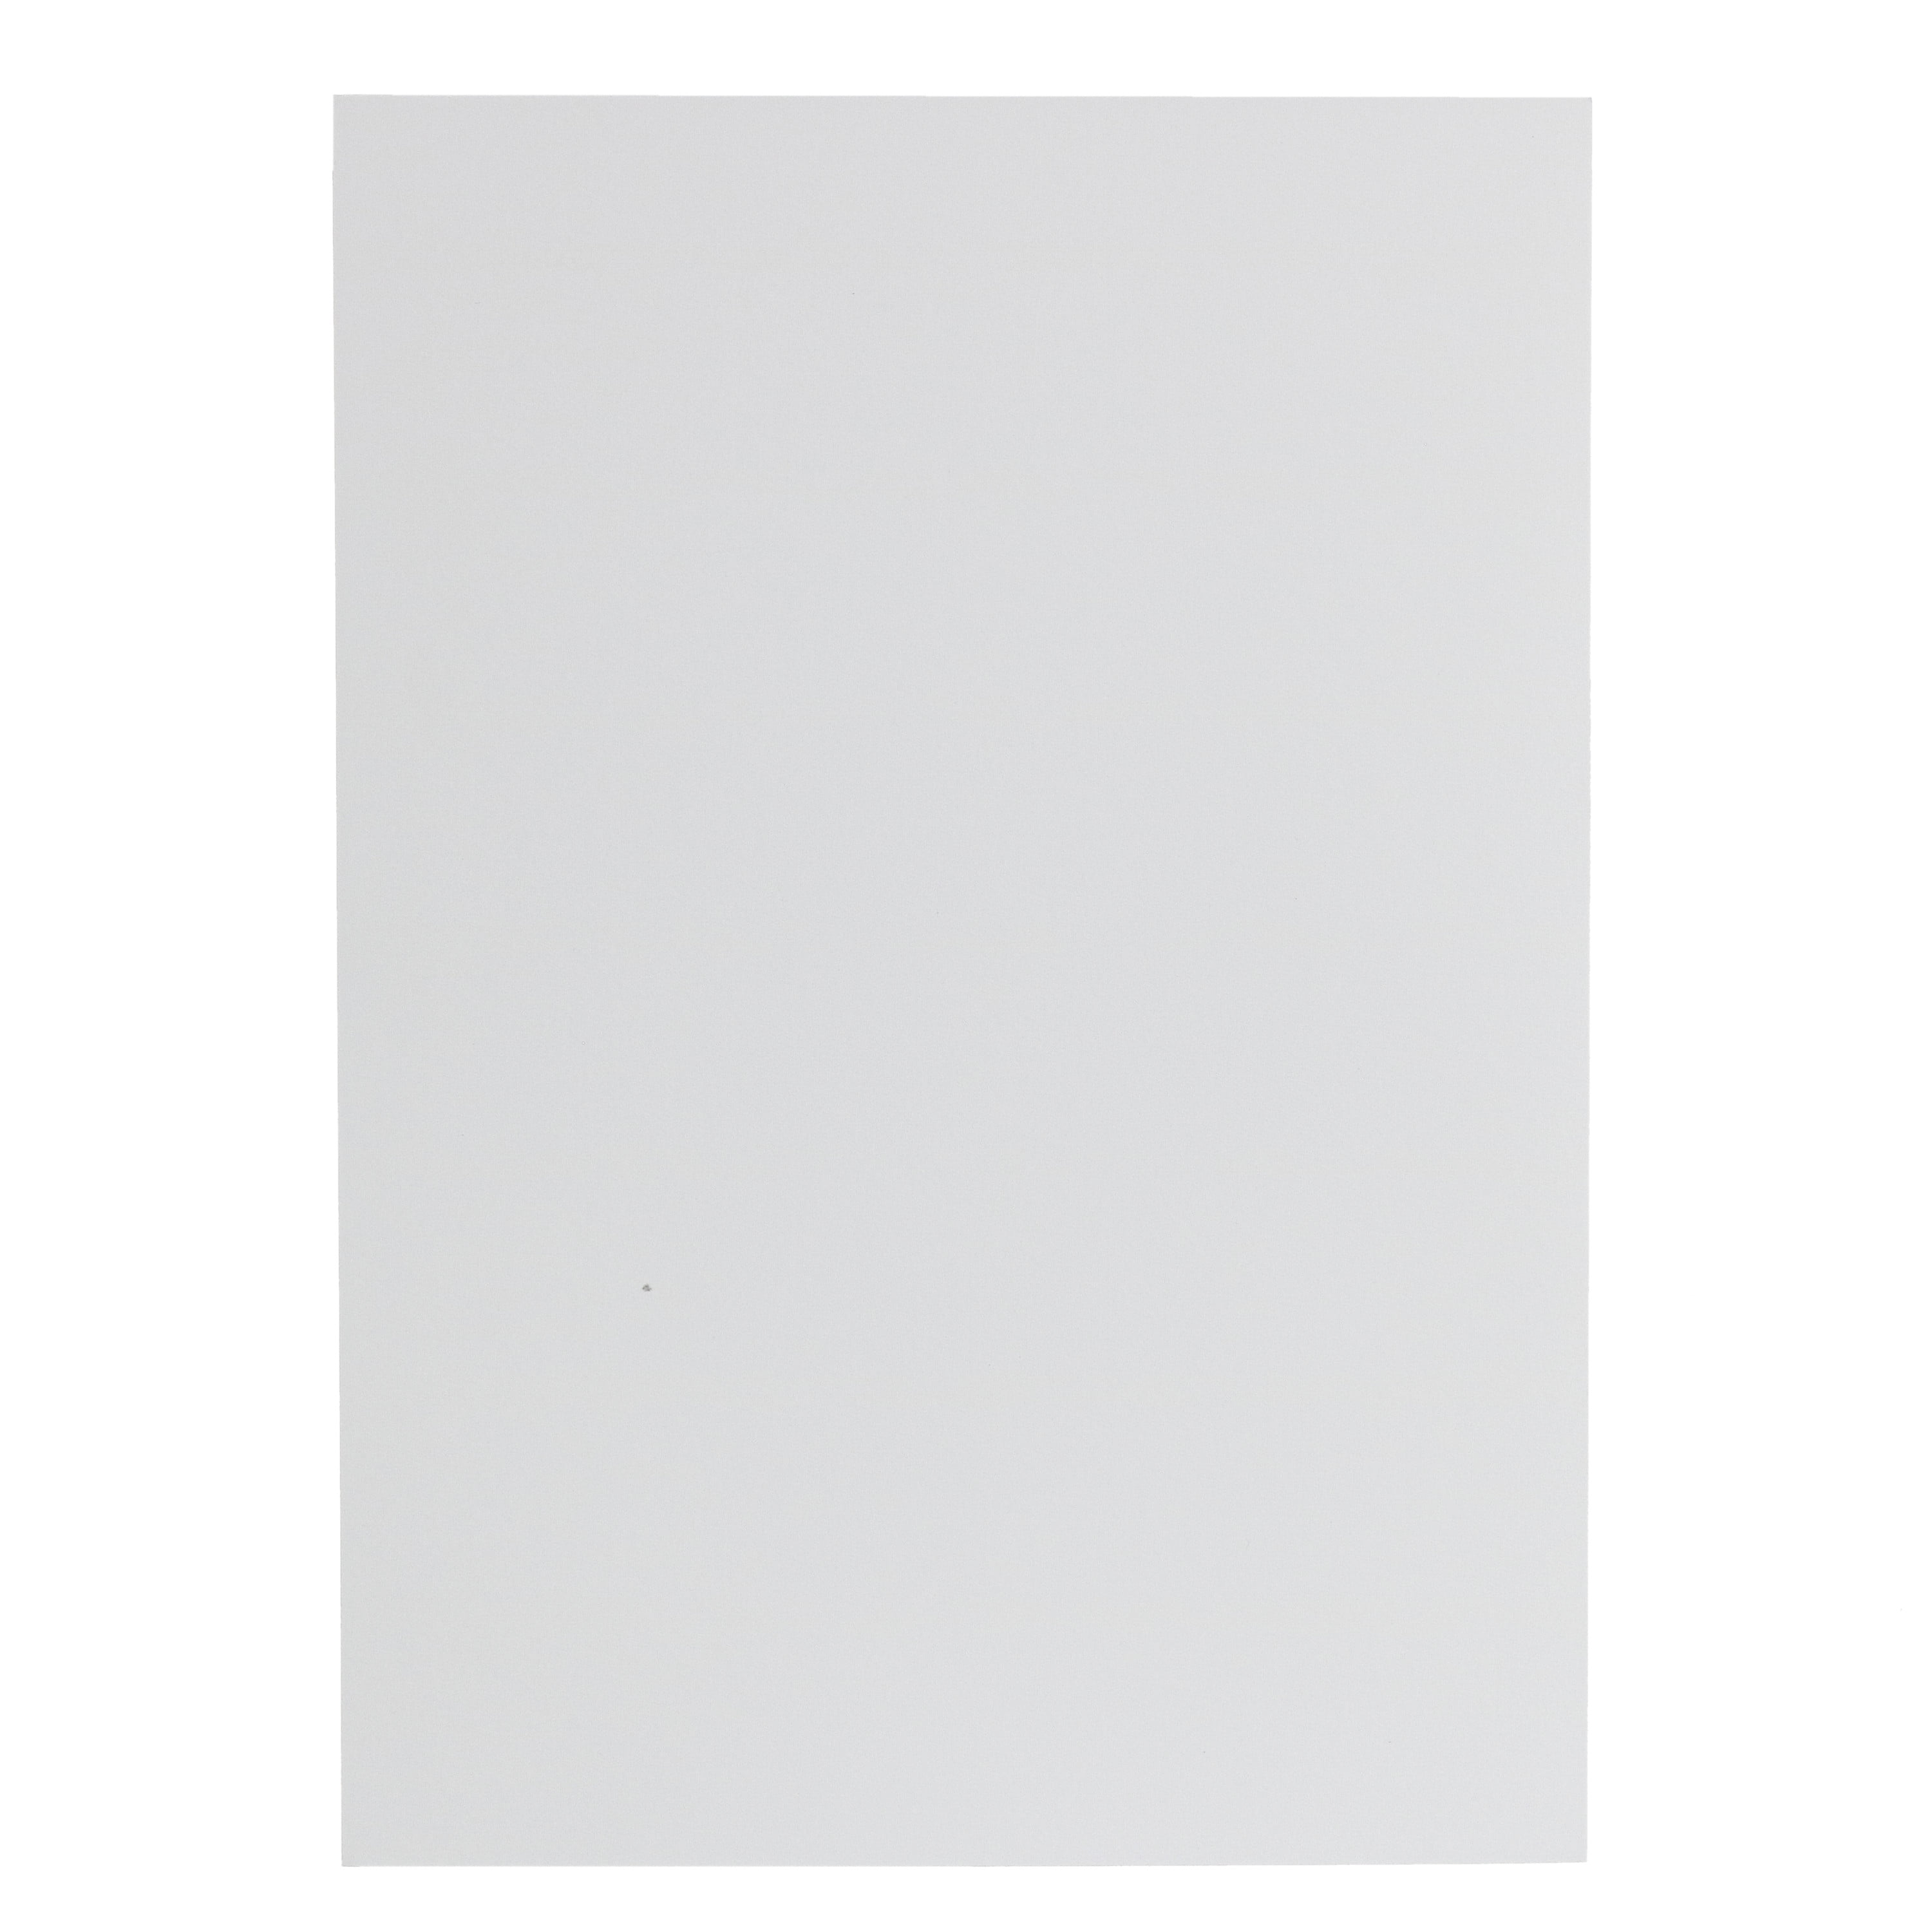 Clairefontaine Clairalfa A4 160g ream 250 sheets White X4 - Ream of paper -  LDLC